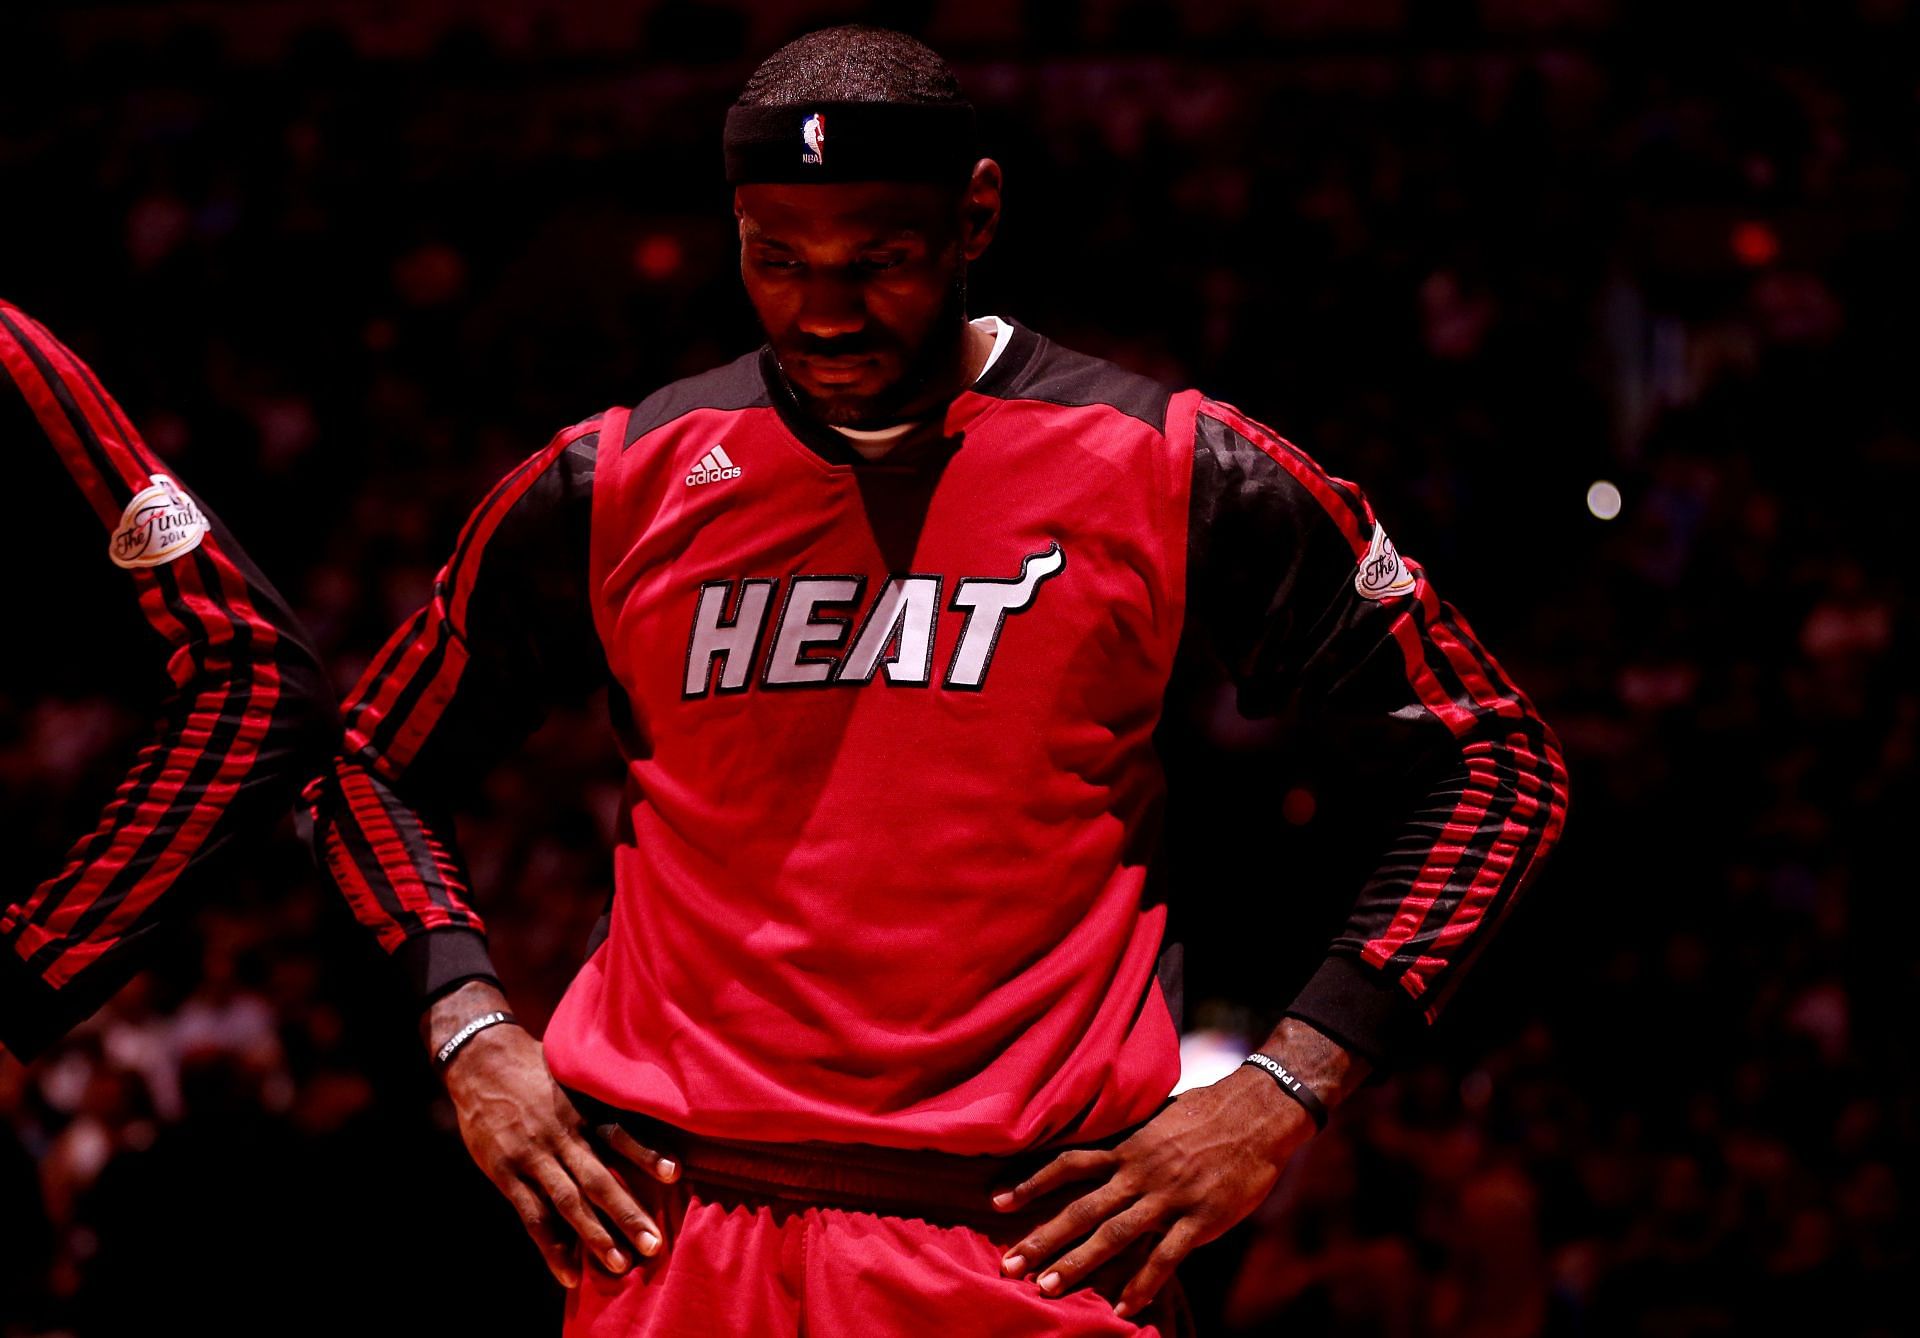 LeBron James #6 of the Miami Heat looks on during the national anthem prior to Game Five of the 2014 NBA Finals against the San Antonio Spurs at the AT&amp;T Center on June 15, 2014 in San Antonio, Texas.